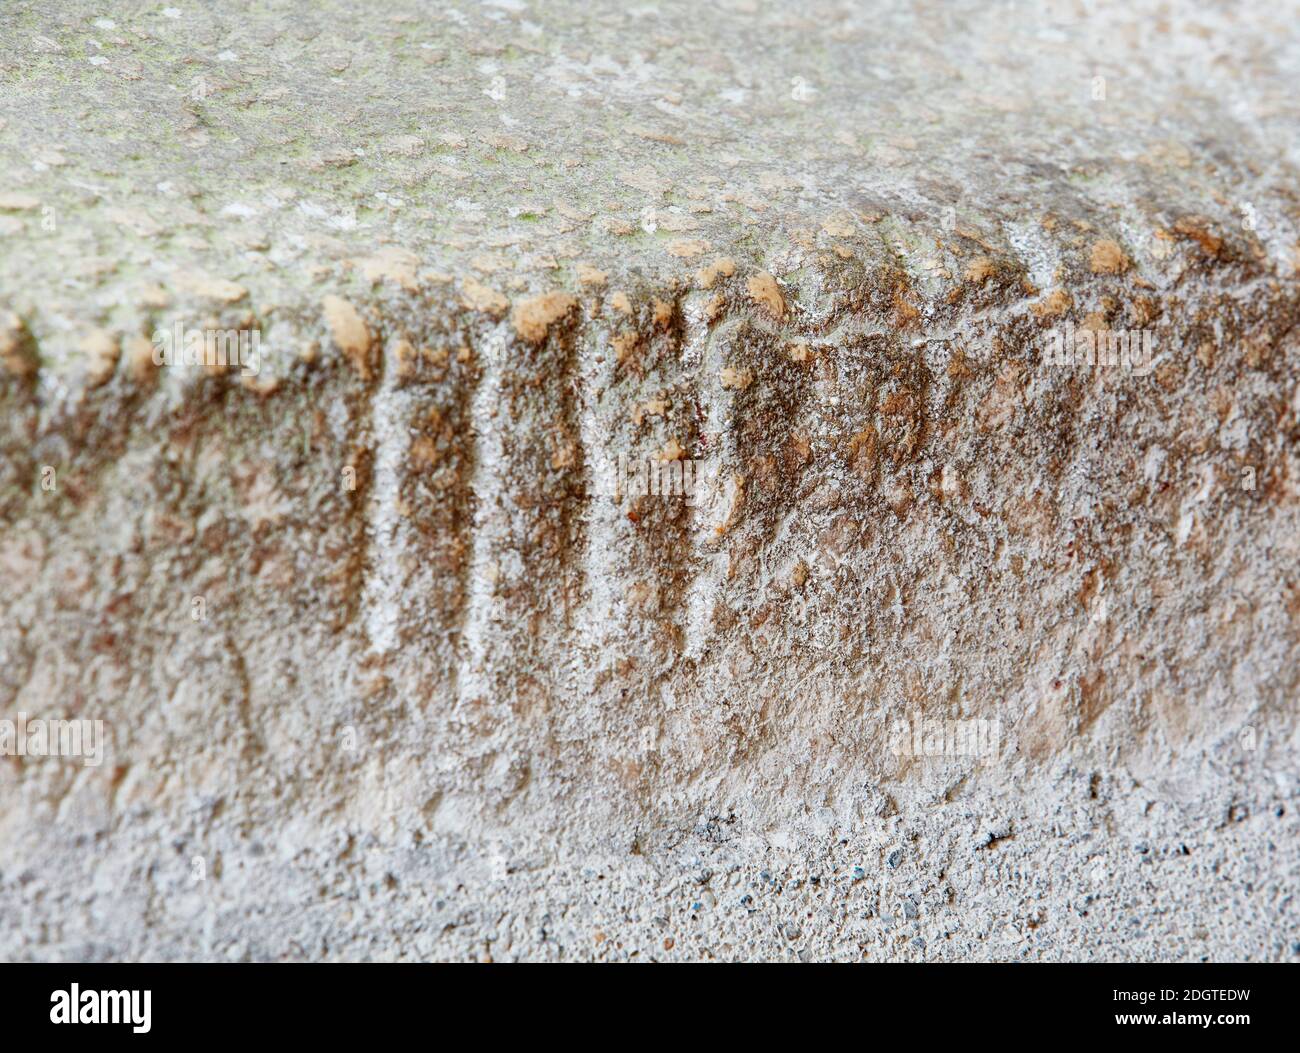 Celtic Ogham script carved onto the Maglocunus stone, St. Brynach's Church in Nevern, Pembrokeshire, Wales, UK Stock Photo